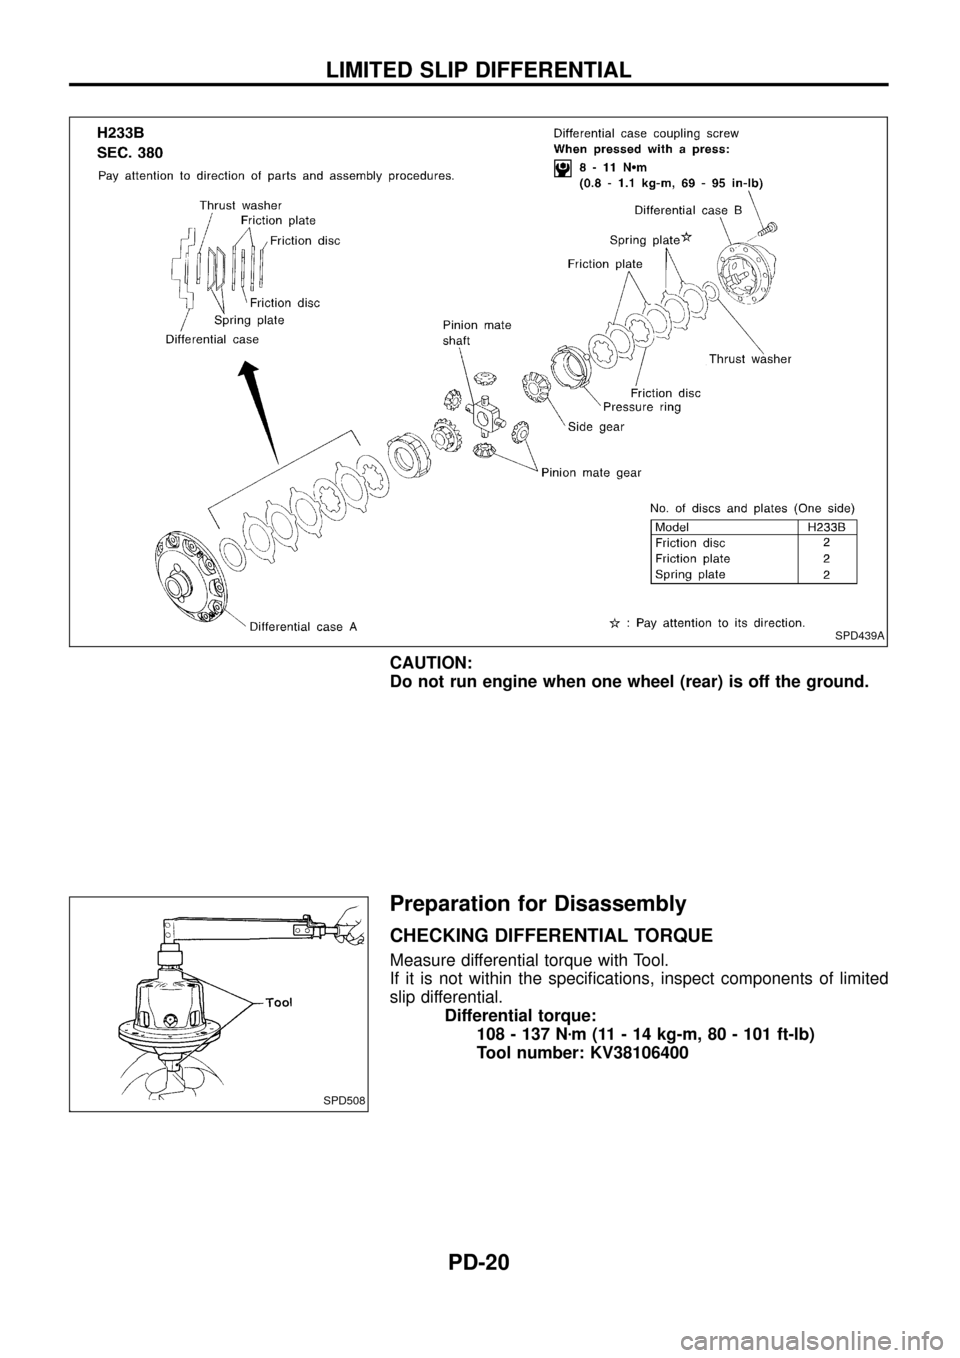 NISSAN PATROL 1998 Y61 / 5.G Propeller Shaft And Differential Carrier Owners Manual CAUTION:
Do not run engine when one wheel (rear) is off the ground.
Preparation for Disassembly
CHECKING DIFFERENTIAL TORQUE
Measure differential torque with Tool.
If it is not within the speci®catio